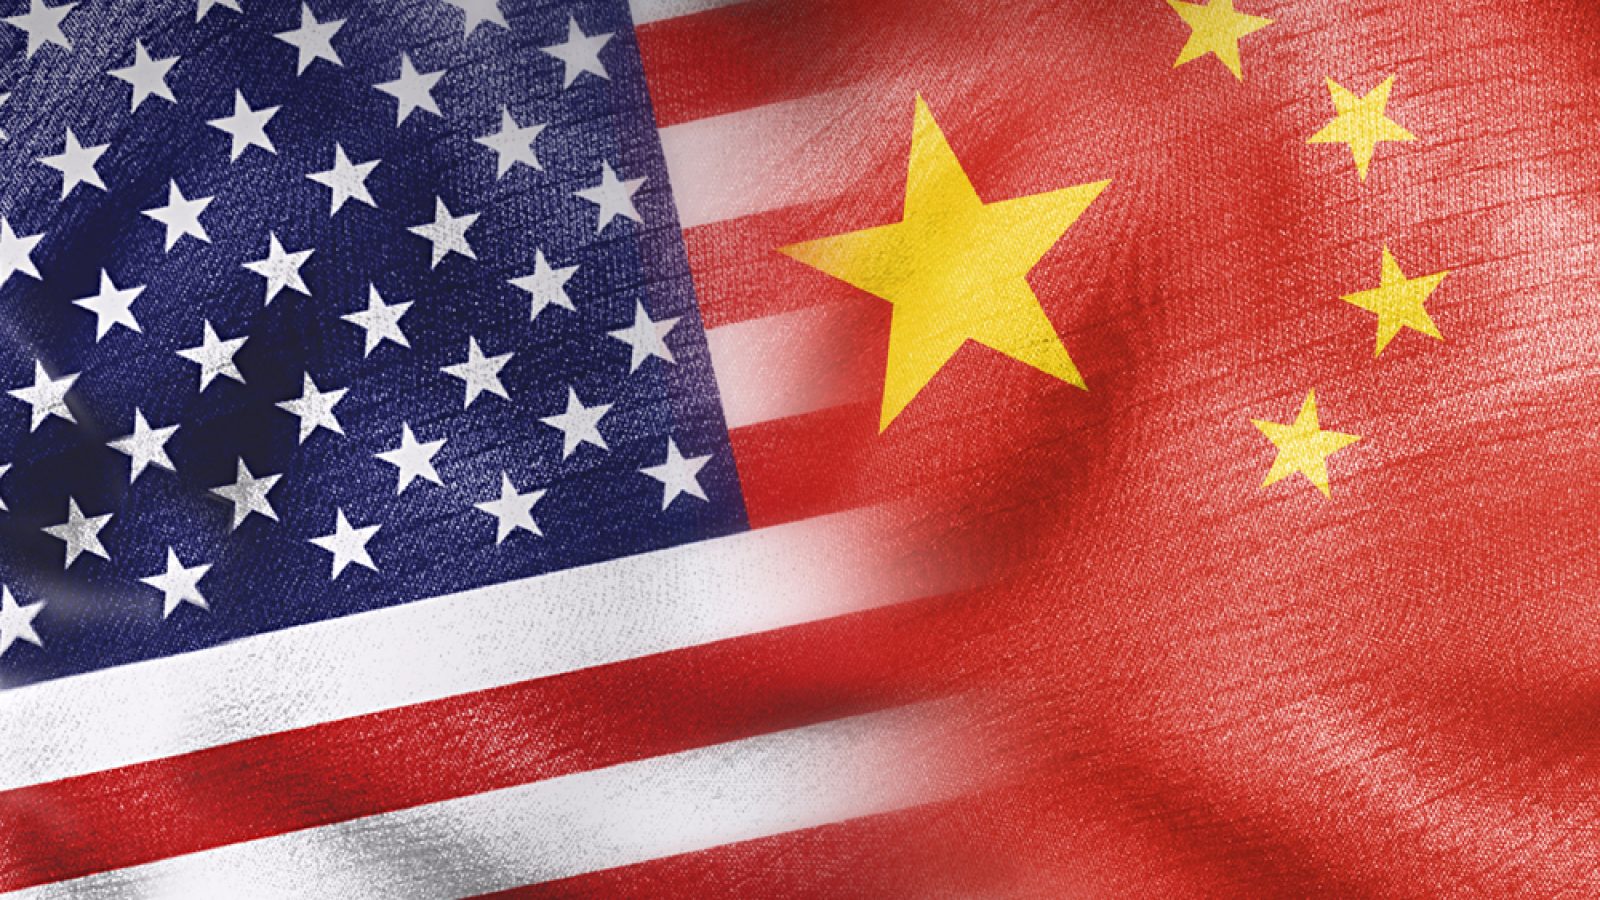 U.S. and China Flags